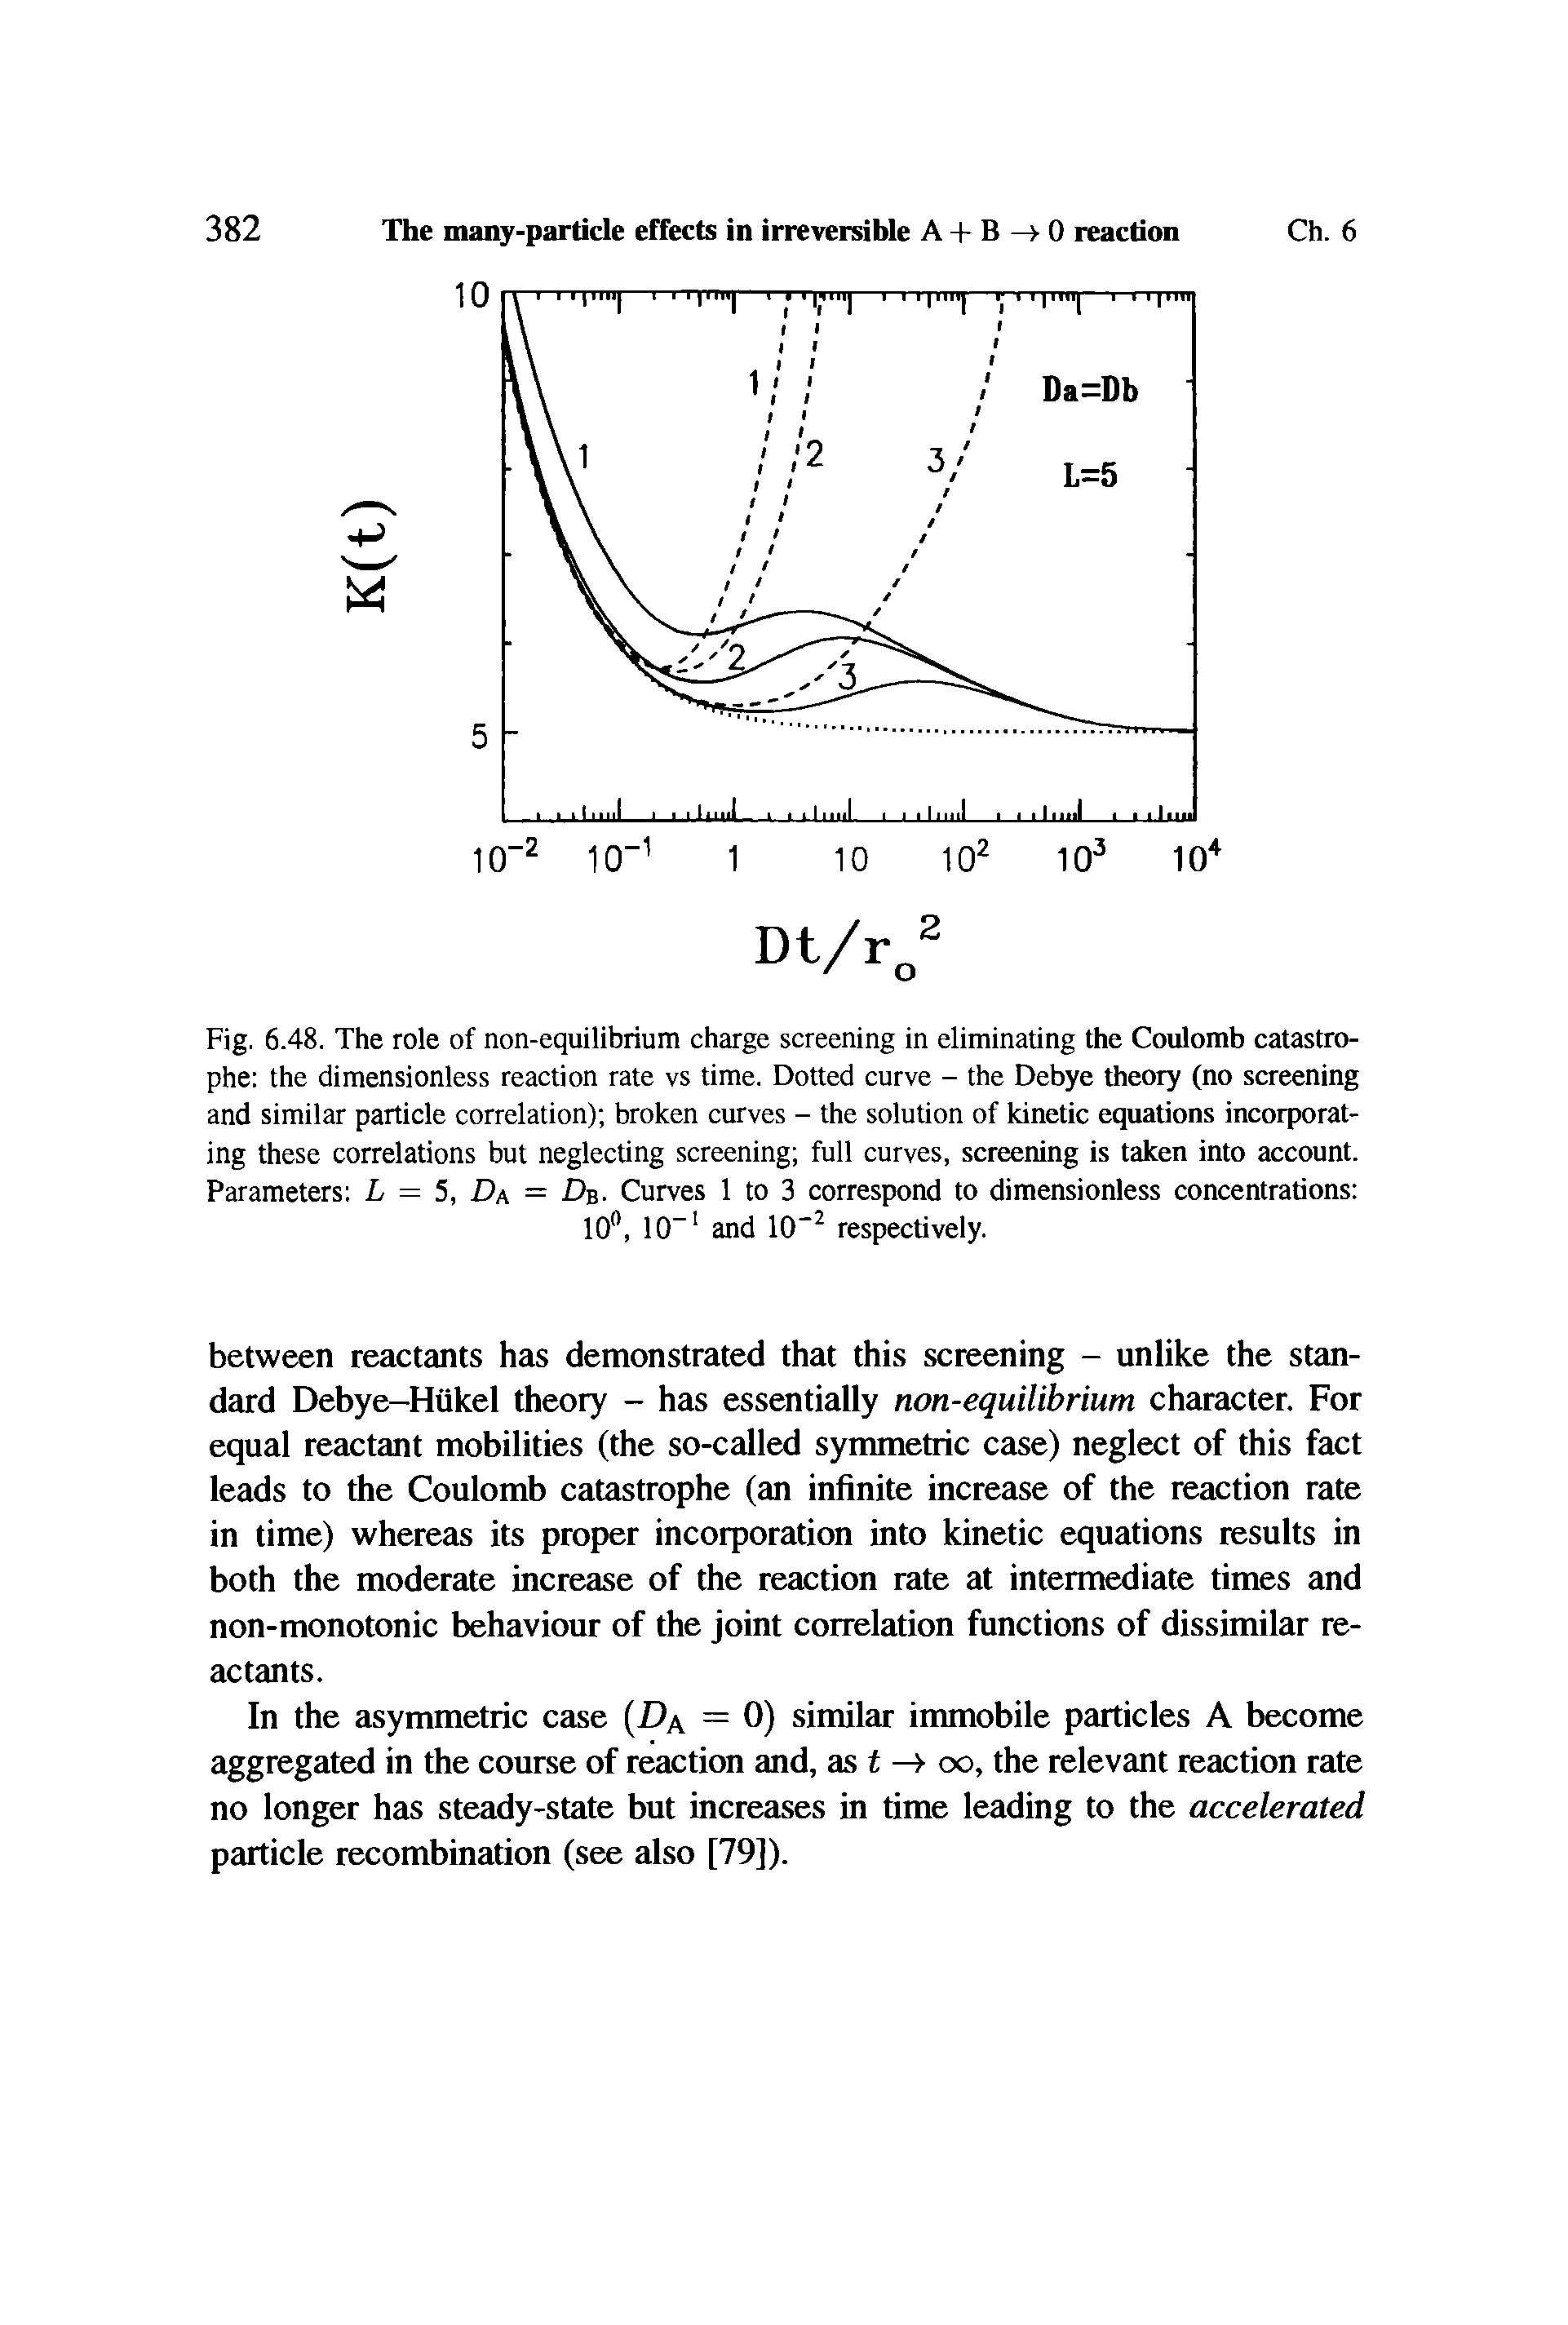 Fig. 6.48. The role of non-equilibrium charge screening in eliminating the Coulomb catastrophe the dimensionless reaction rate vs time. Dotted curve - the Debye theory (no screening and similar particle correlation) broken curves - the solution of kinetic equations incorporating these correlations but neglecting screening full curves, screening is taken into account. Parameters L = 5, Da = Db. Curves 1 to 3 correspond to dimensionless concentrations ...